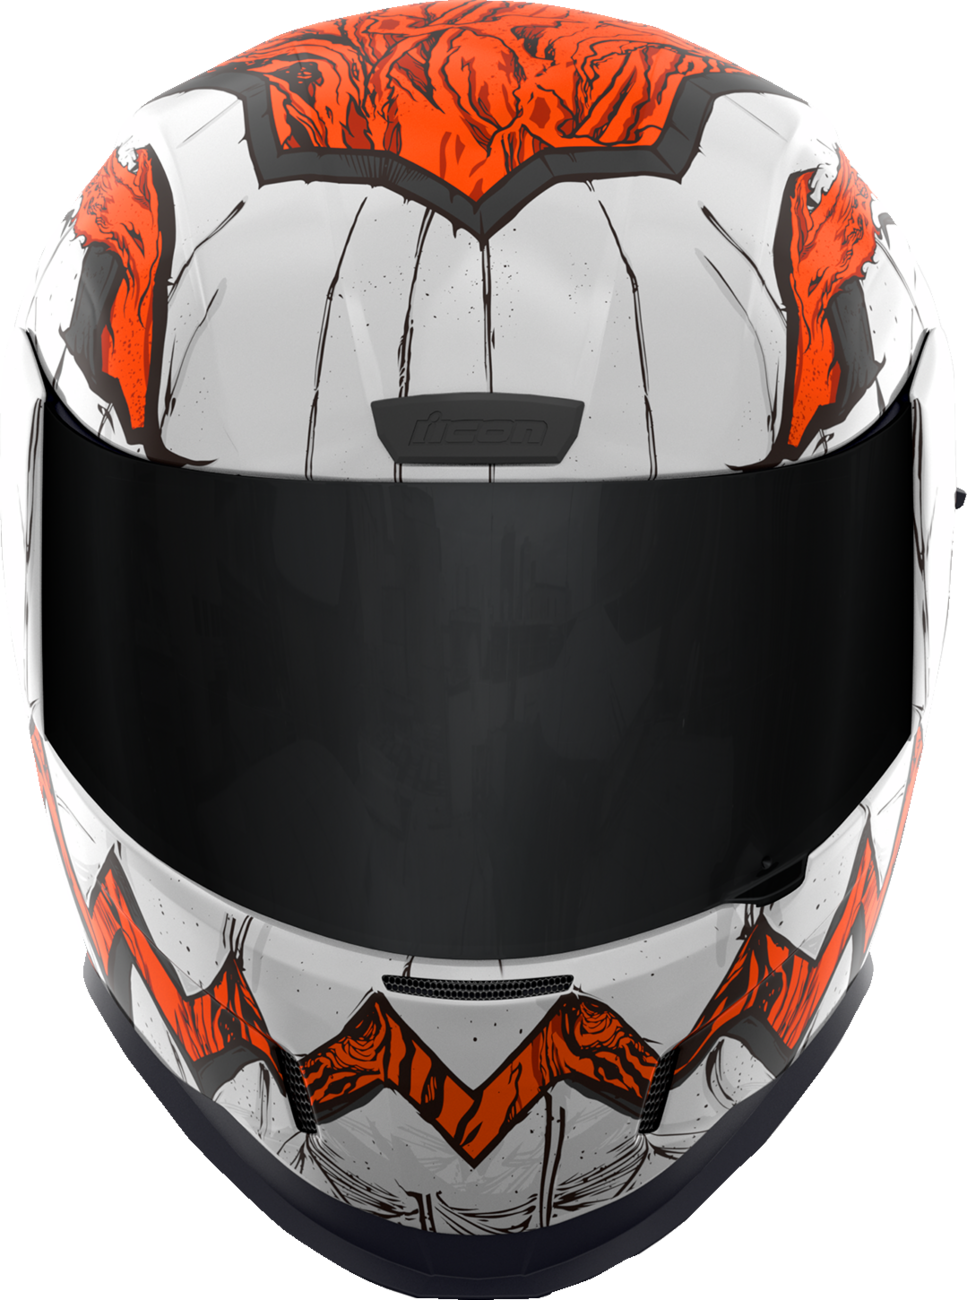 ICON Airform™ Helmet - Trick or Street 3 - White - Small 0101-16248